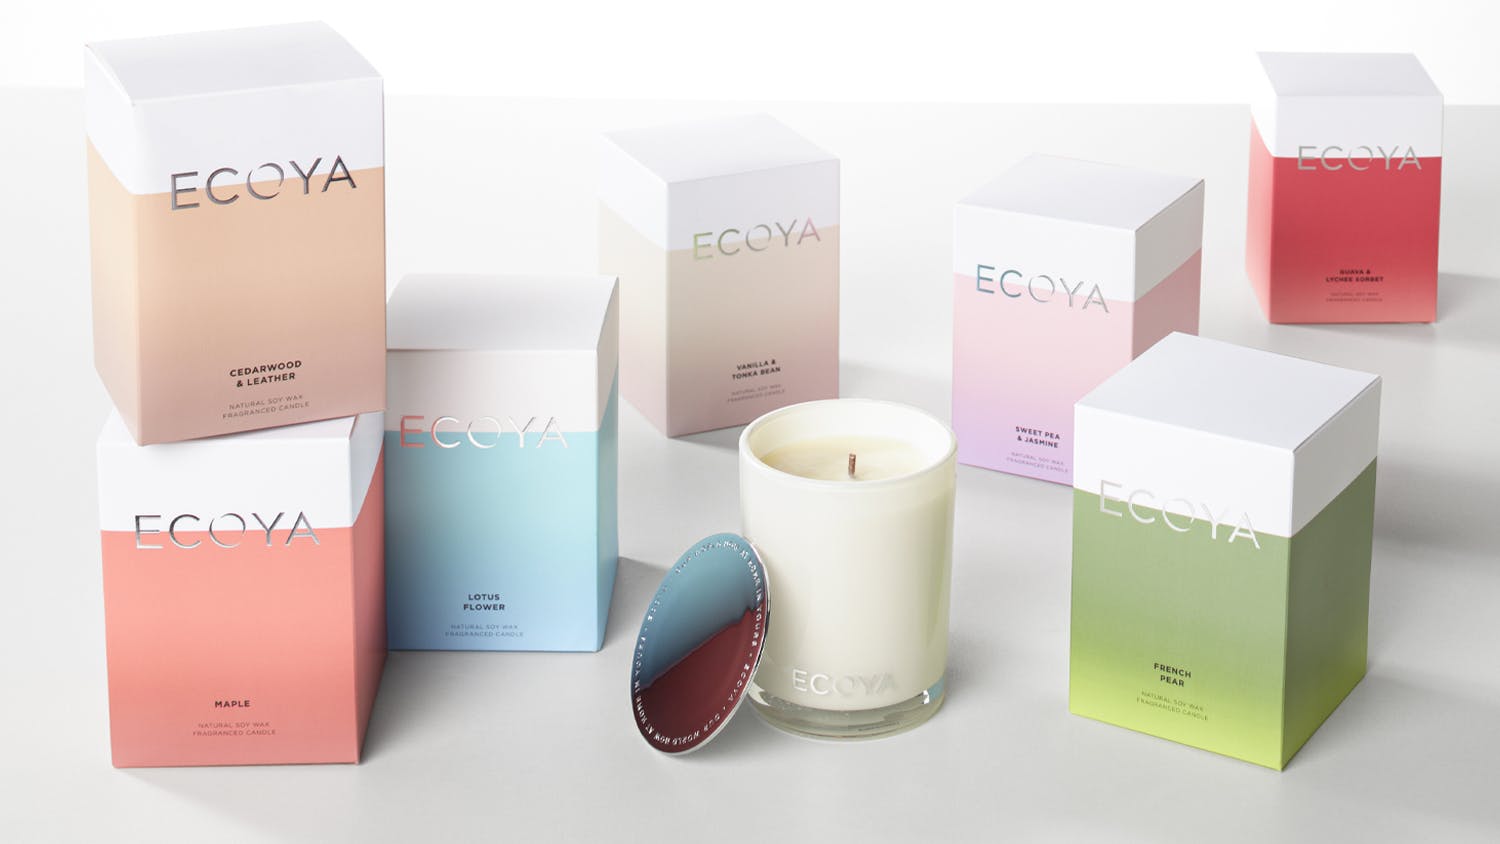 Ecoya Mini 80g Scented Soy Candle - Lotus Flower